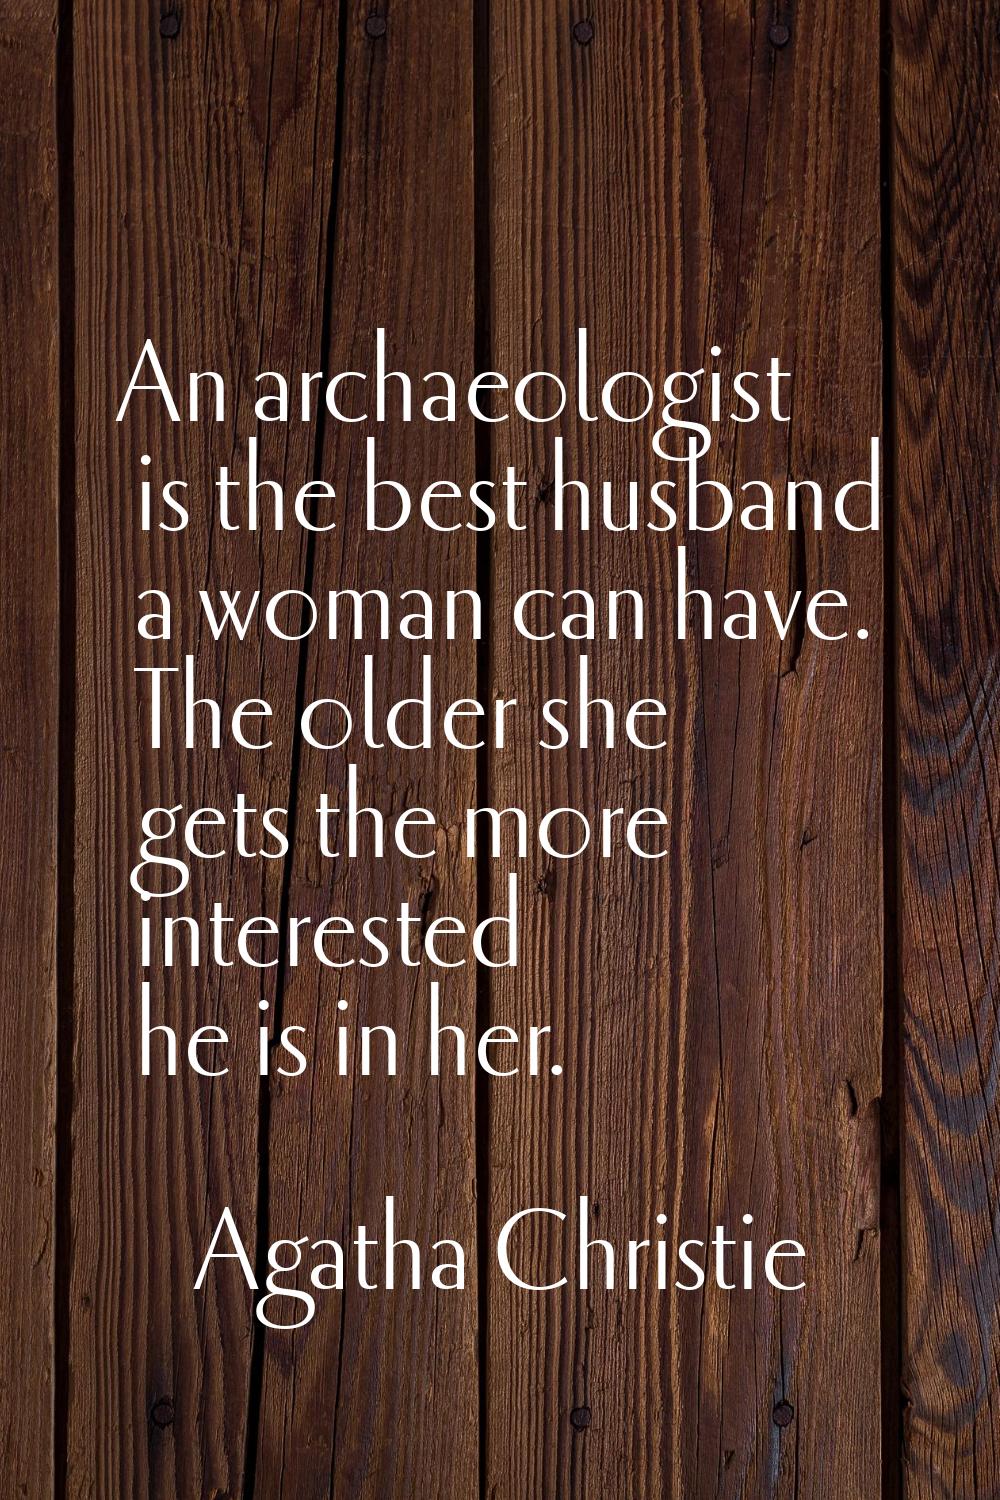 An archaeologist is the best husband a woman can have. The older she gets the more interested he is